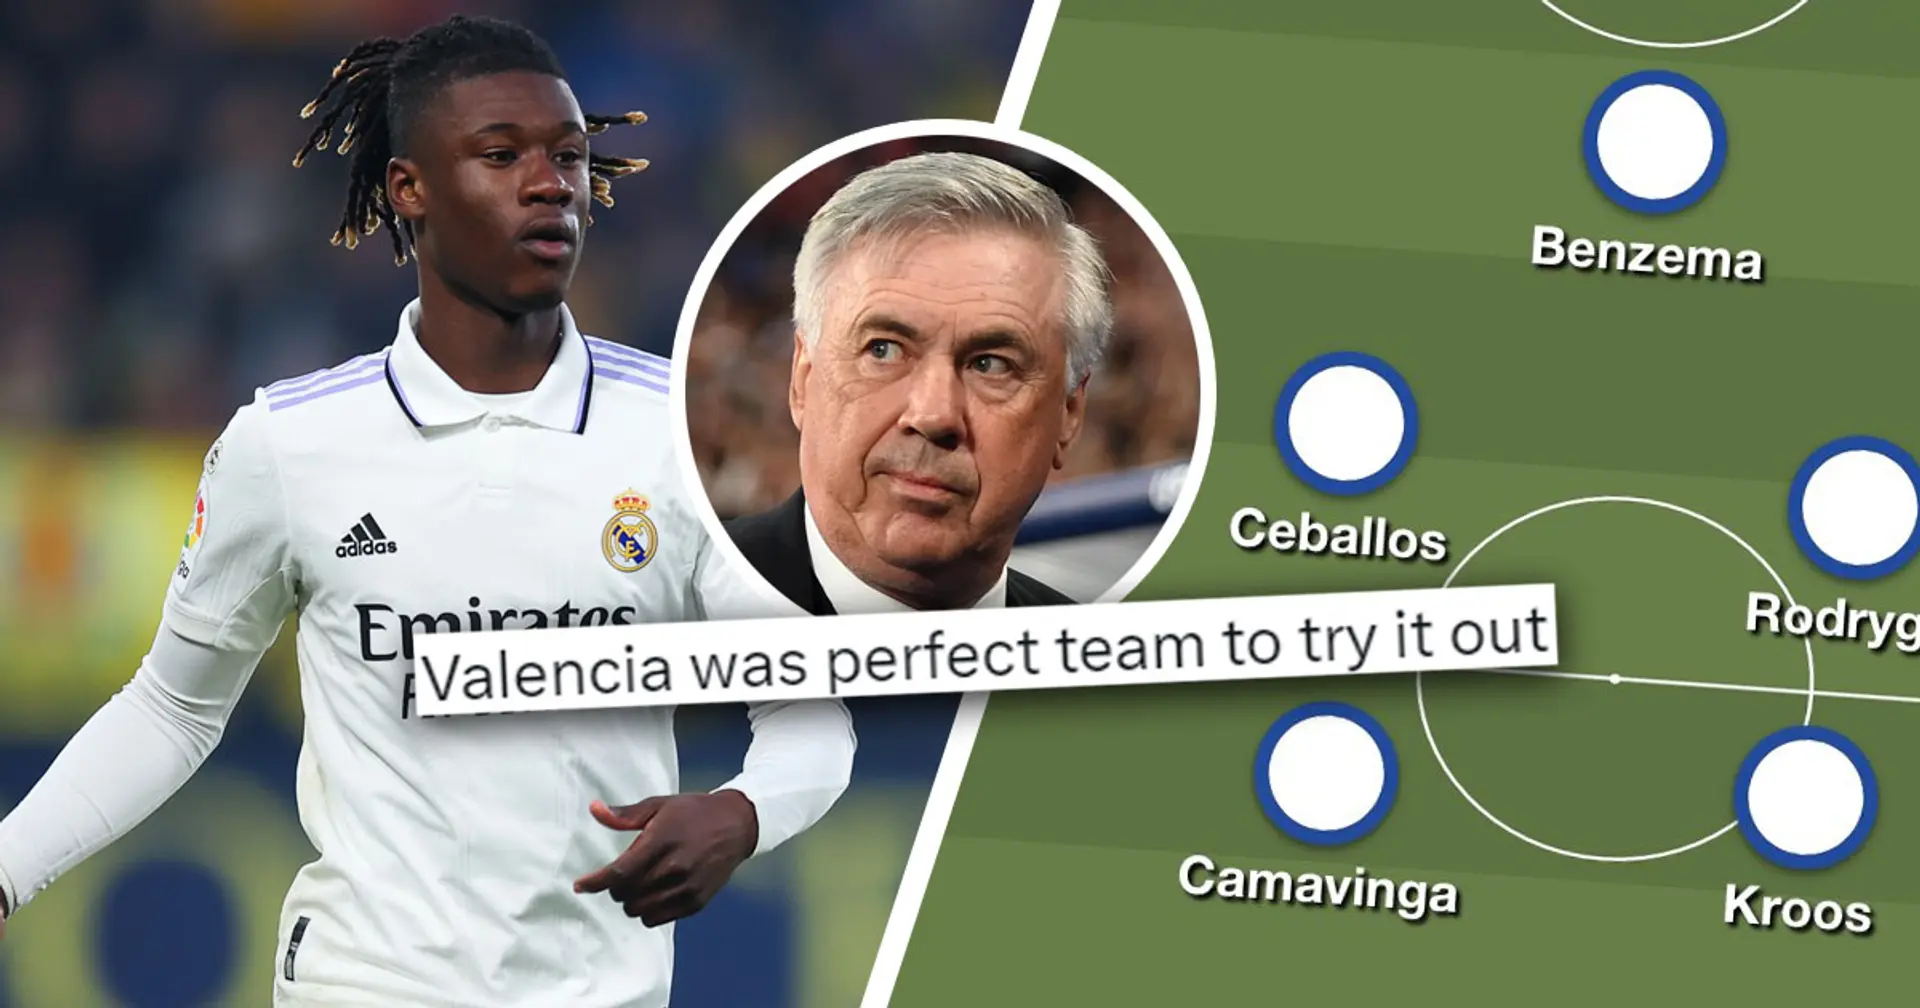 Shown in lineups: fan urges Ancelotti to try more offensive approach with new formation, Camavinga to play key role